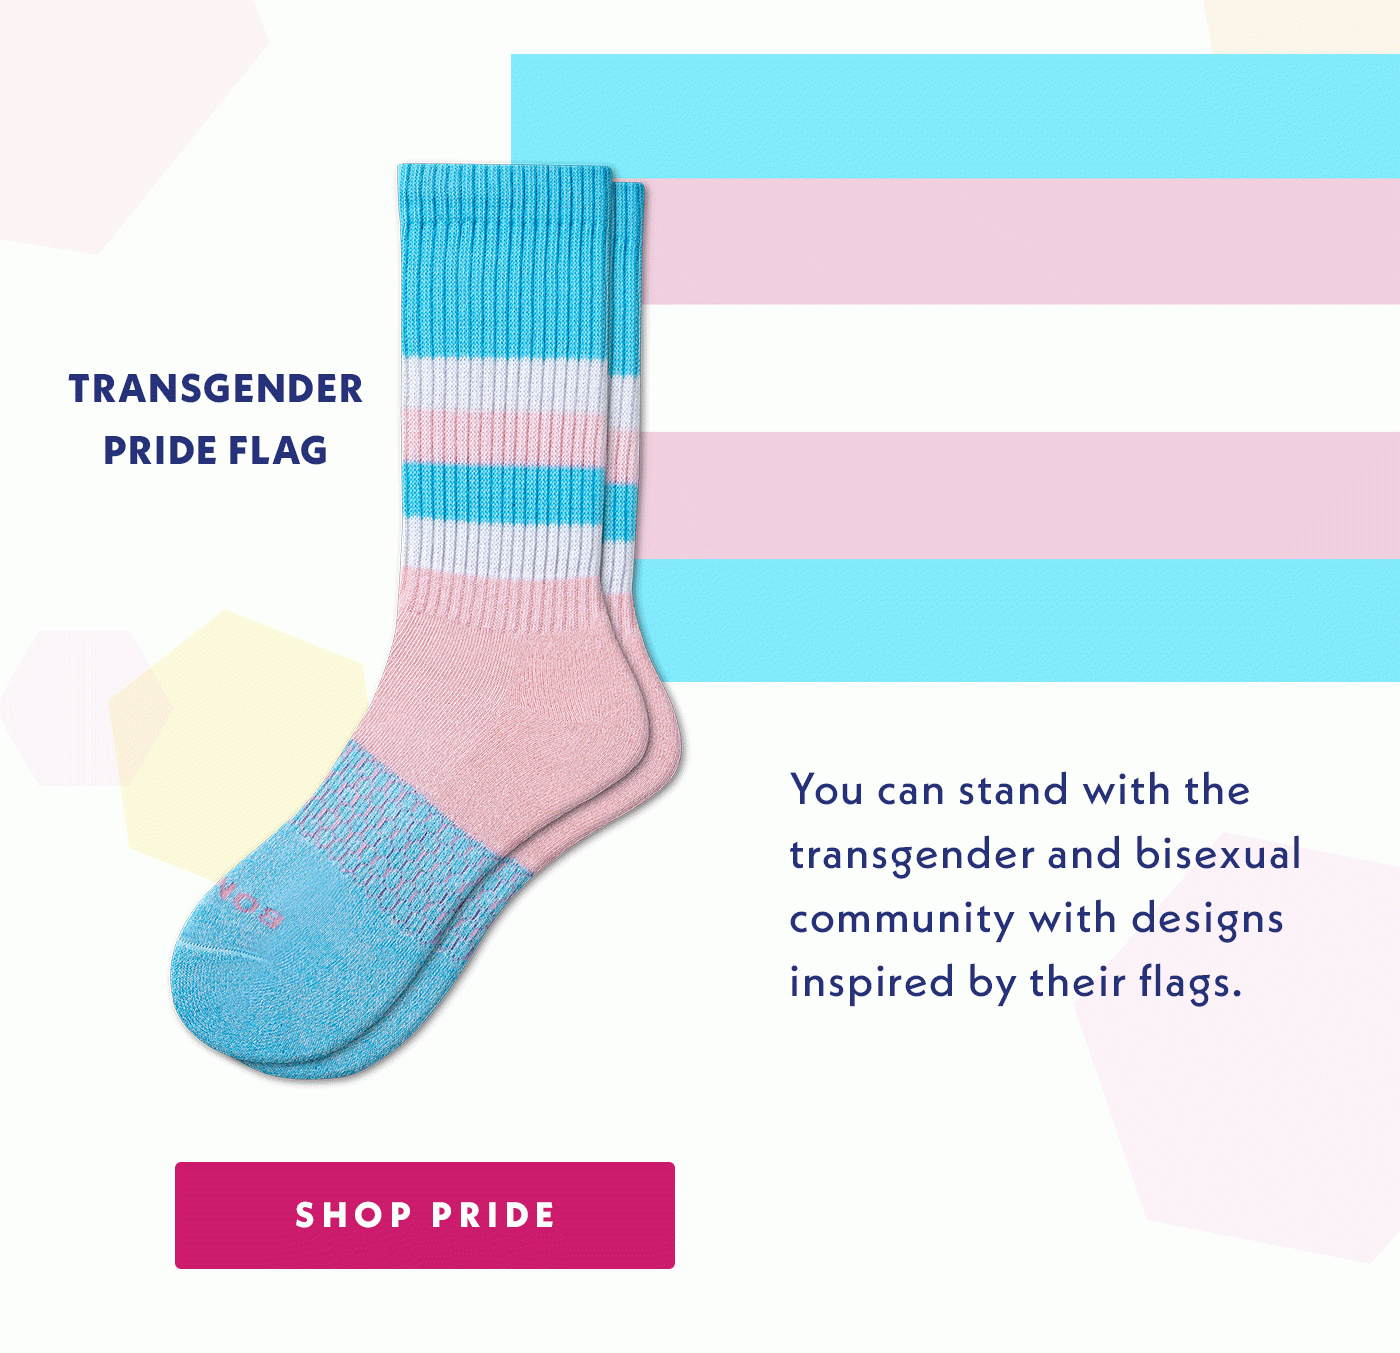 Transgender Pride Flag | Bisexual Pride Flag | Rainbow Pride Flag | You can stand with the transgender and bisexual community with designs inspired by their flags. | Shop Pride